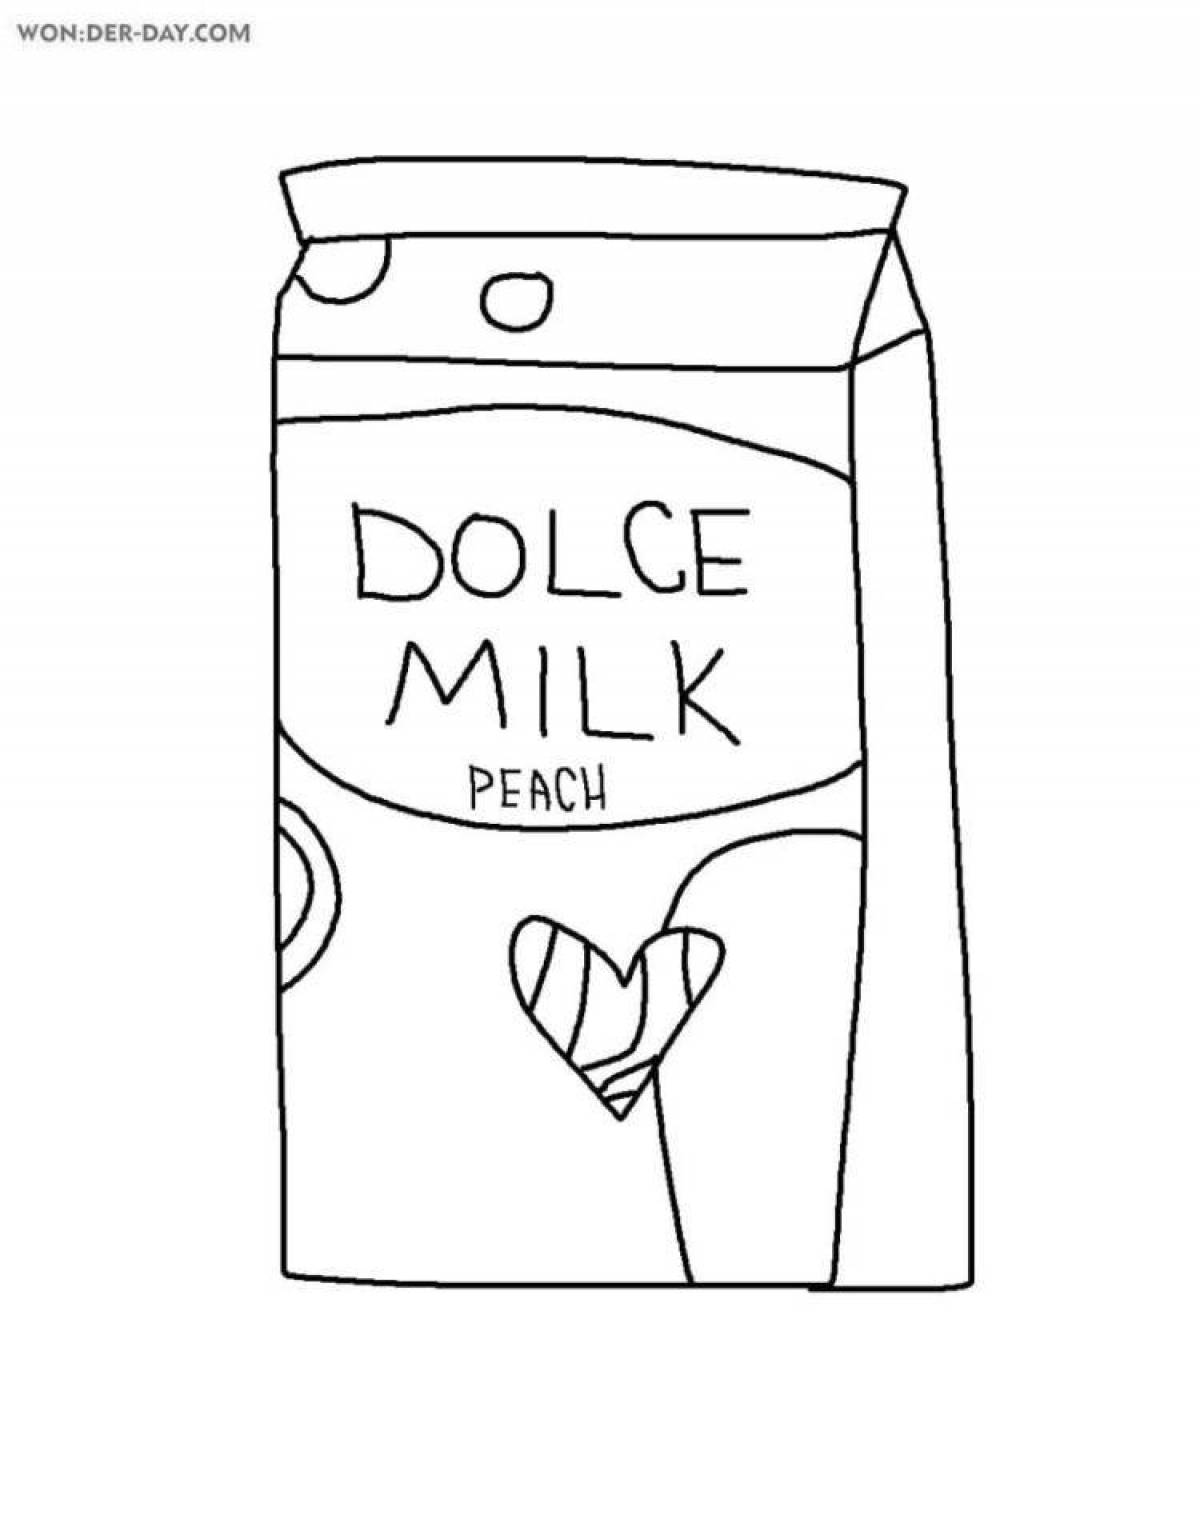 Colouring sweet milk duck dolce